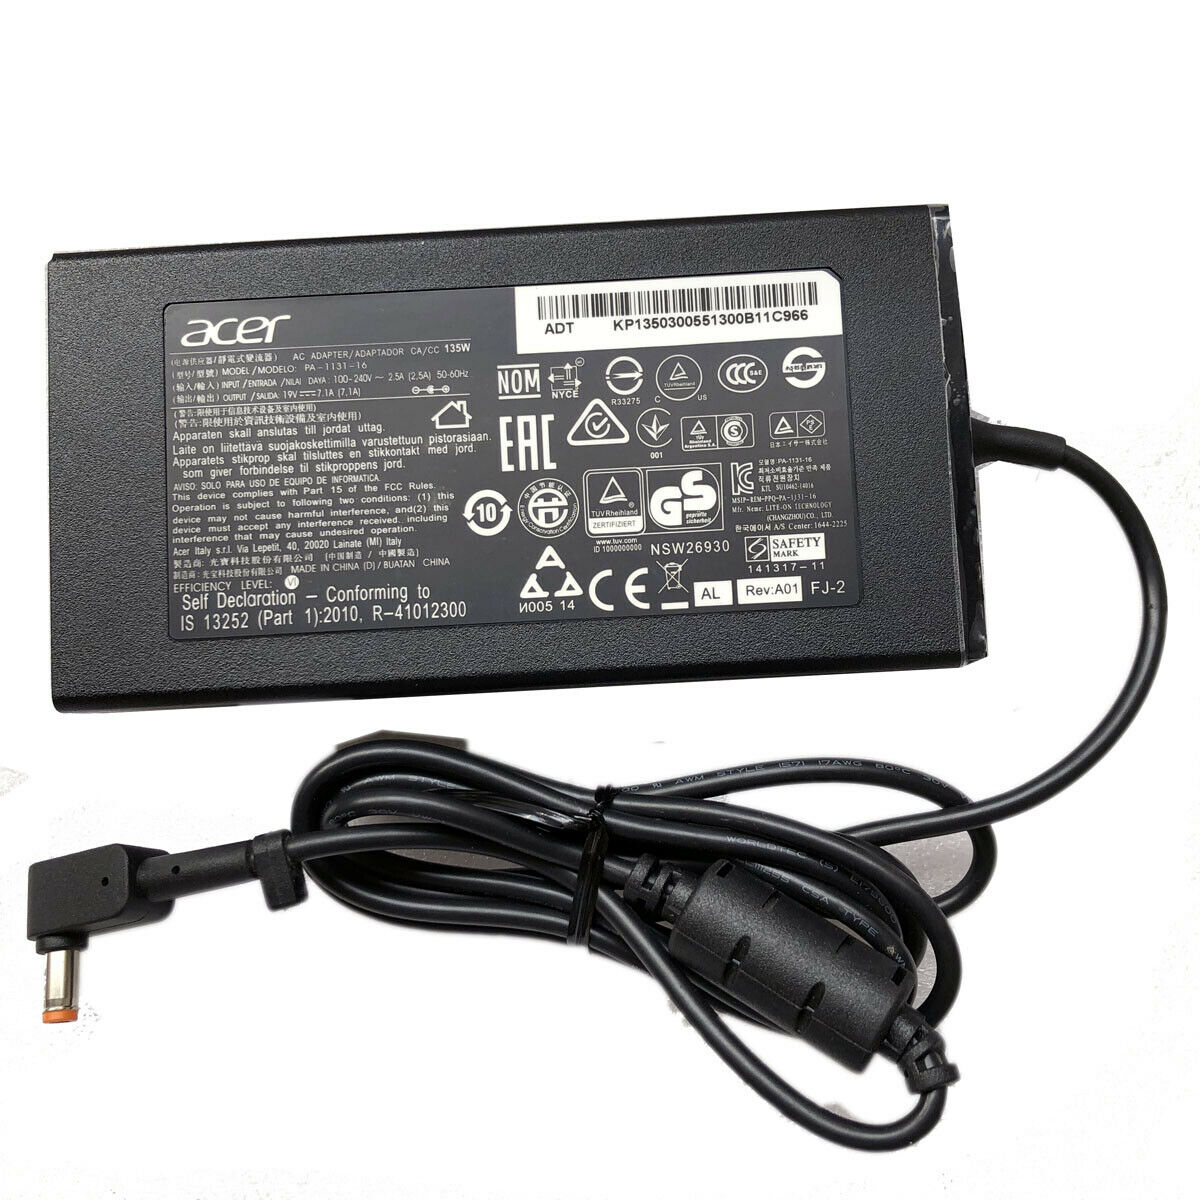 NEW Original 19V 7.1A 135W AC Adapter Charger For Acer Aspire Nitro VN7-791G-792A PSU Charger